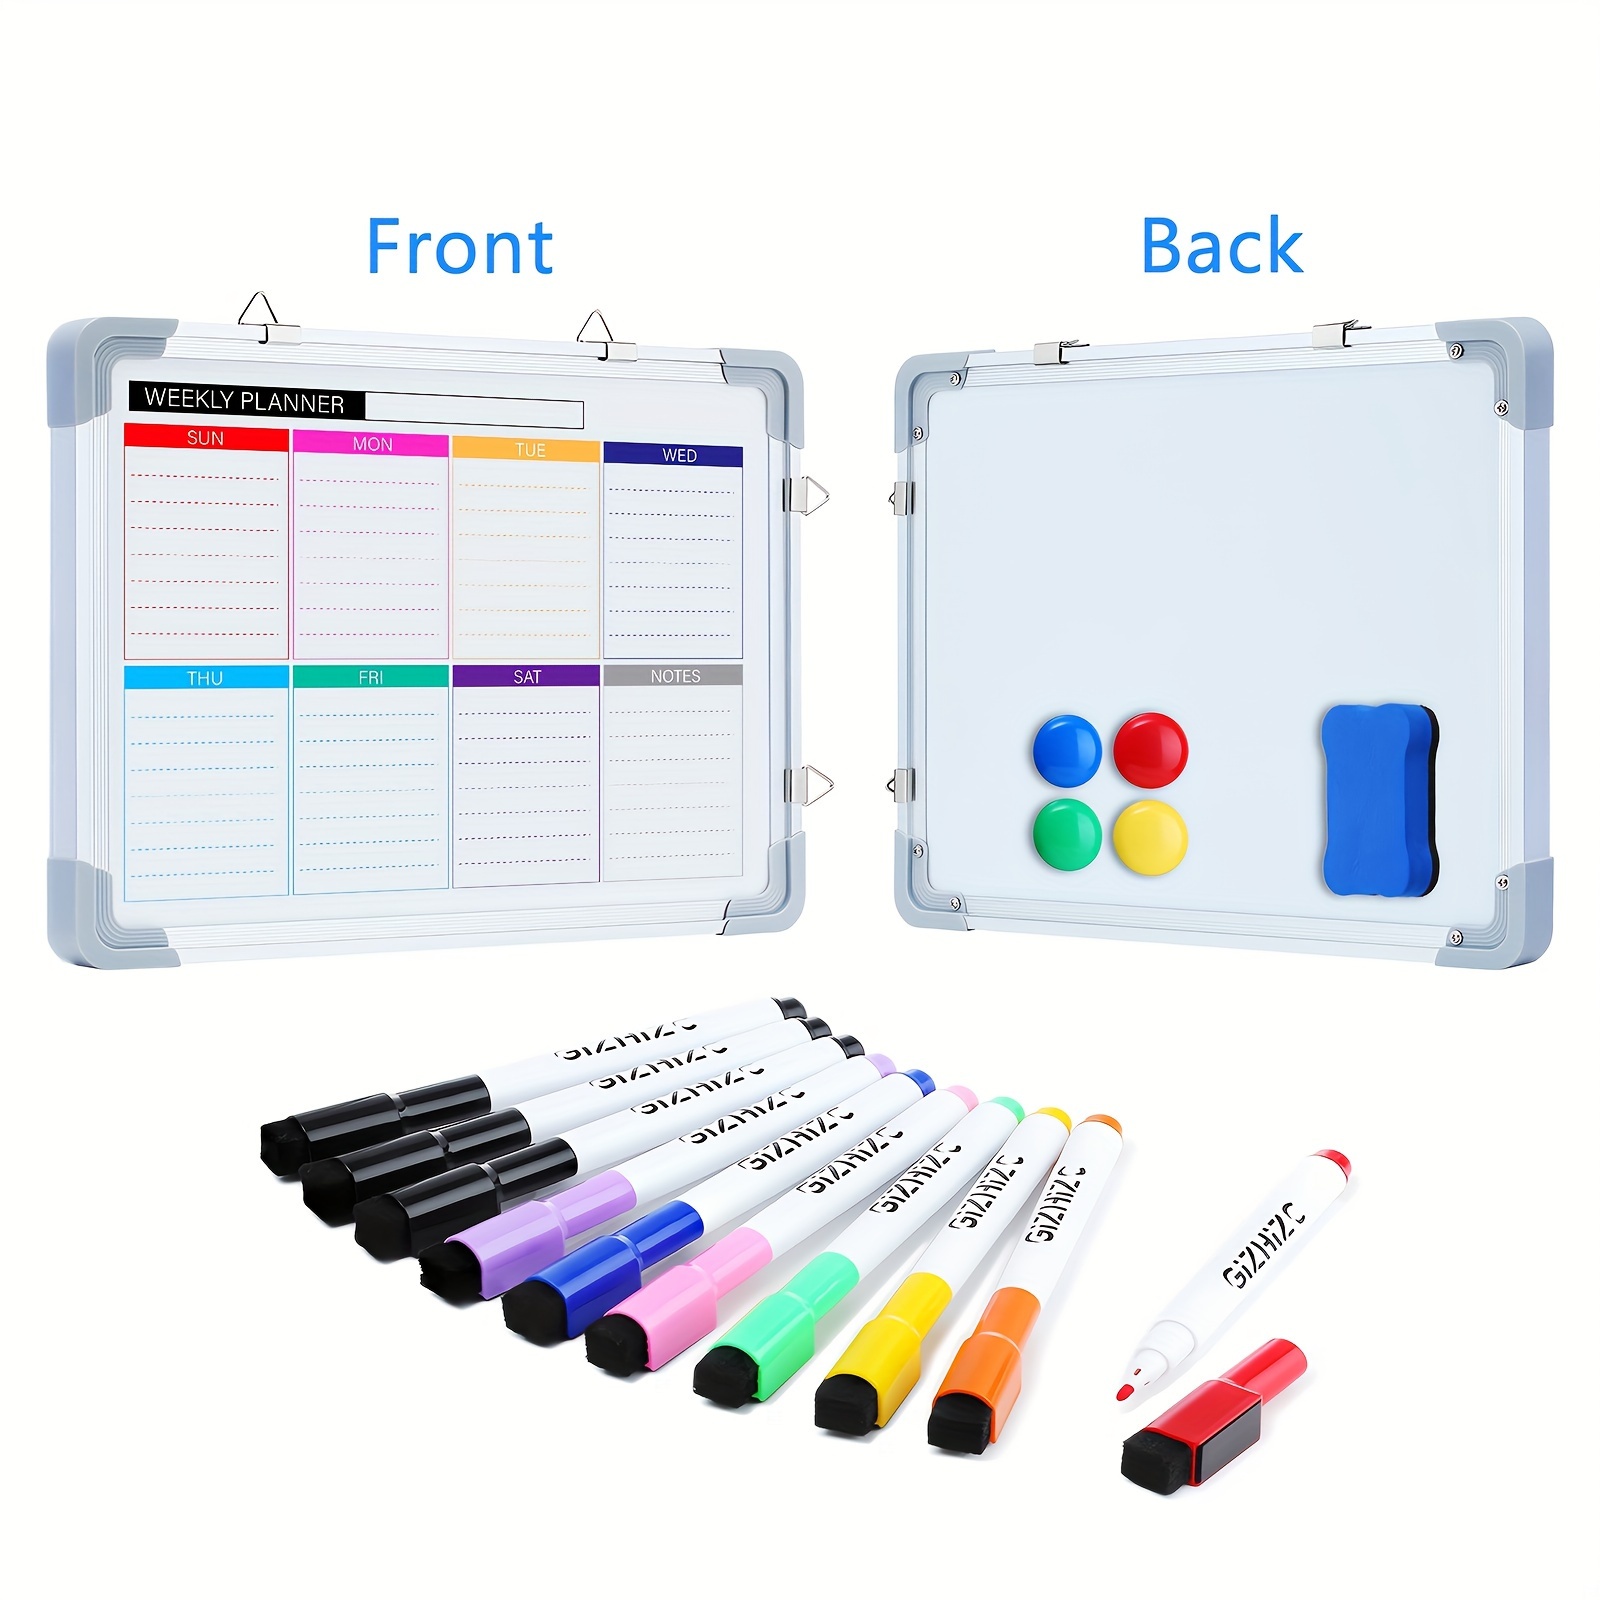  Small Dry Erase Whiteboard for Wall, 16 x 12